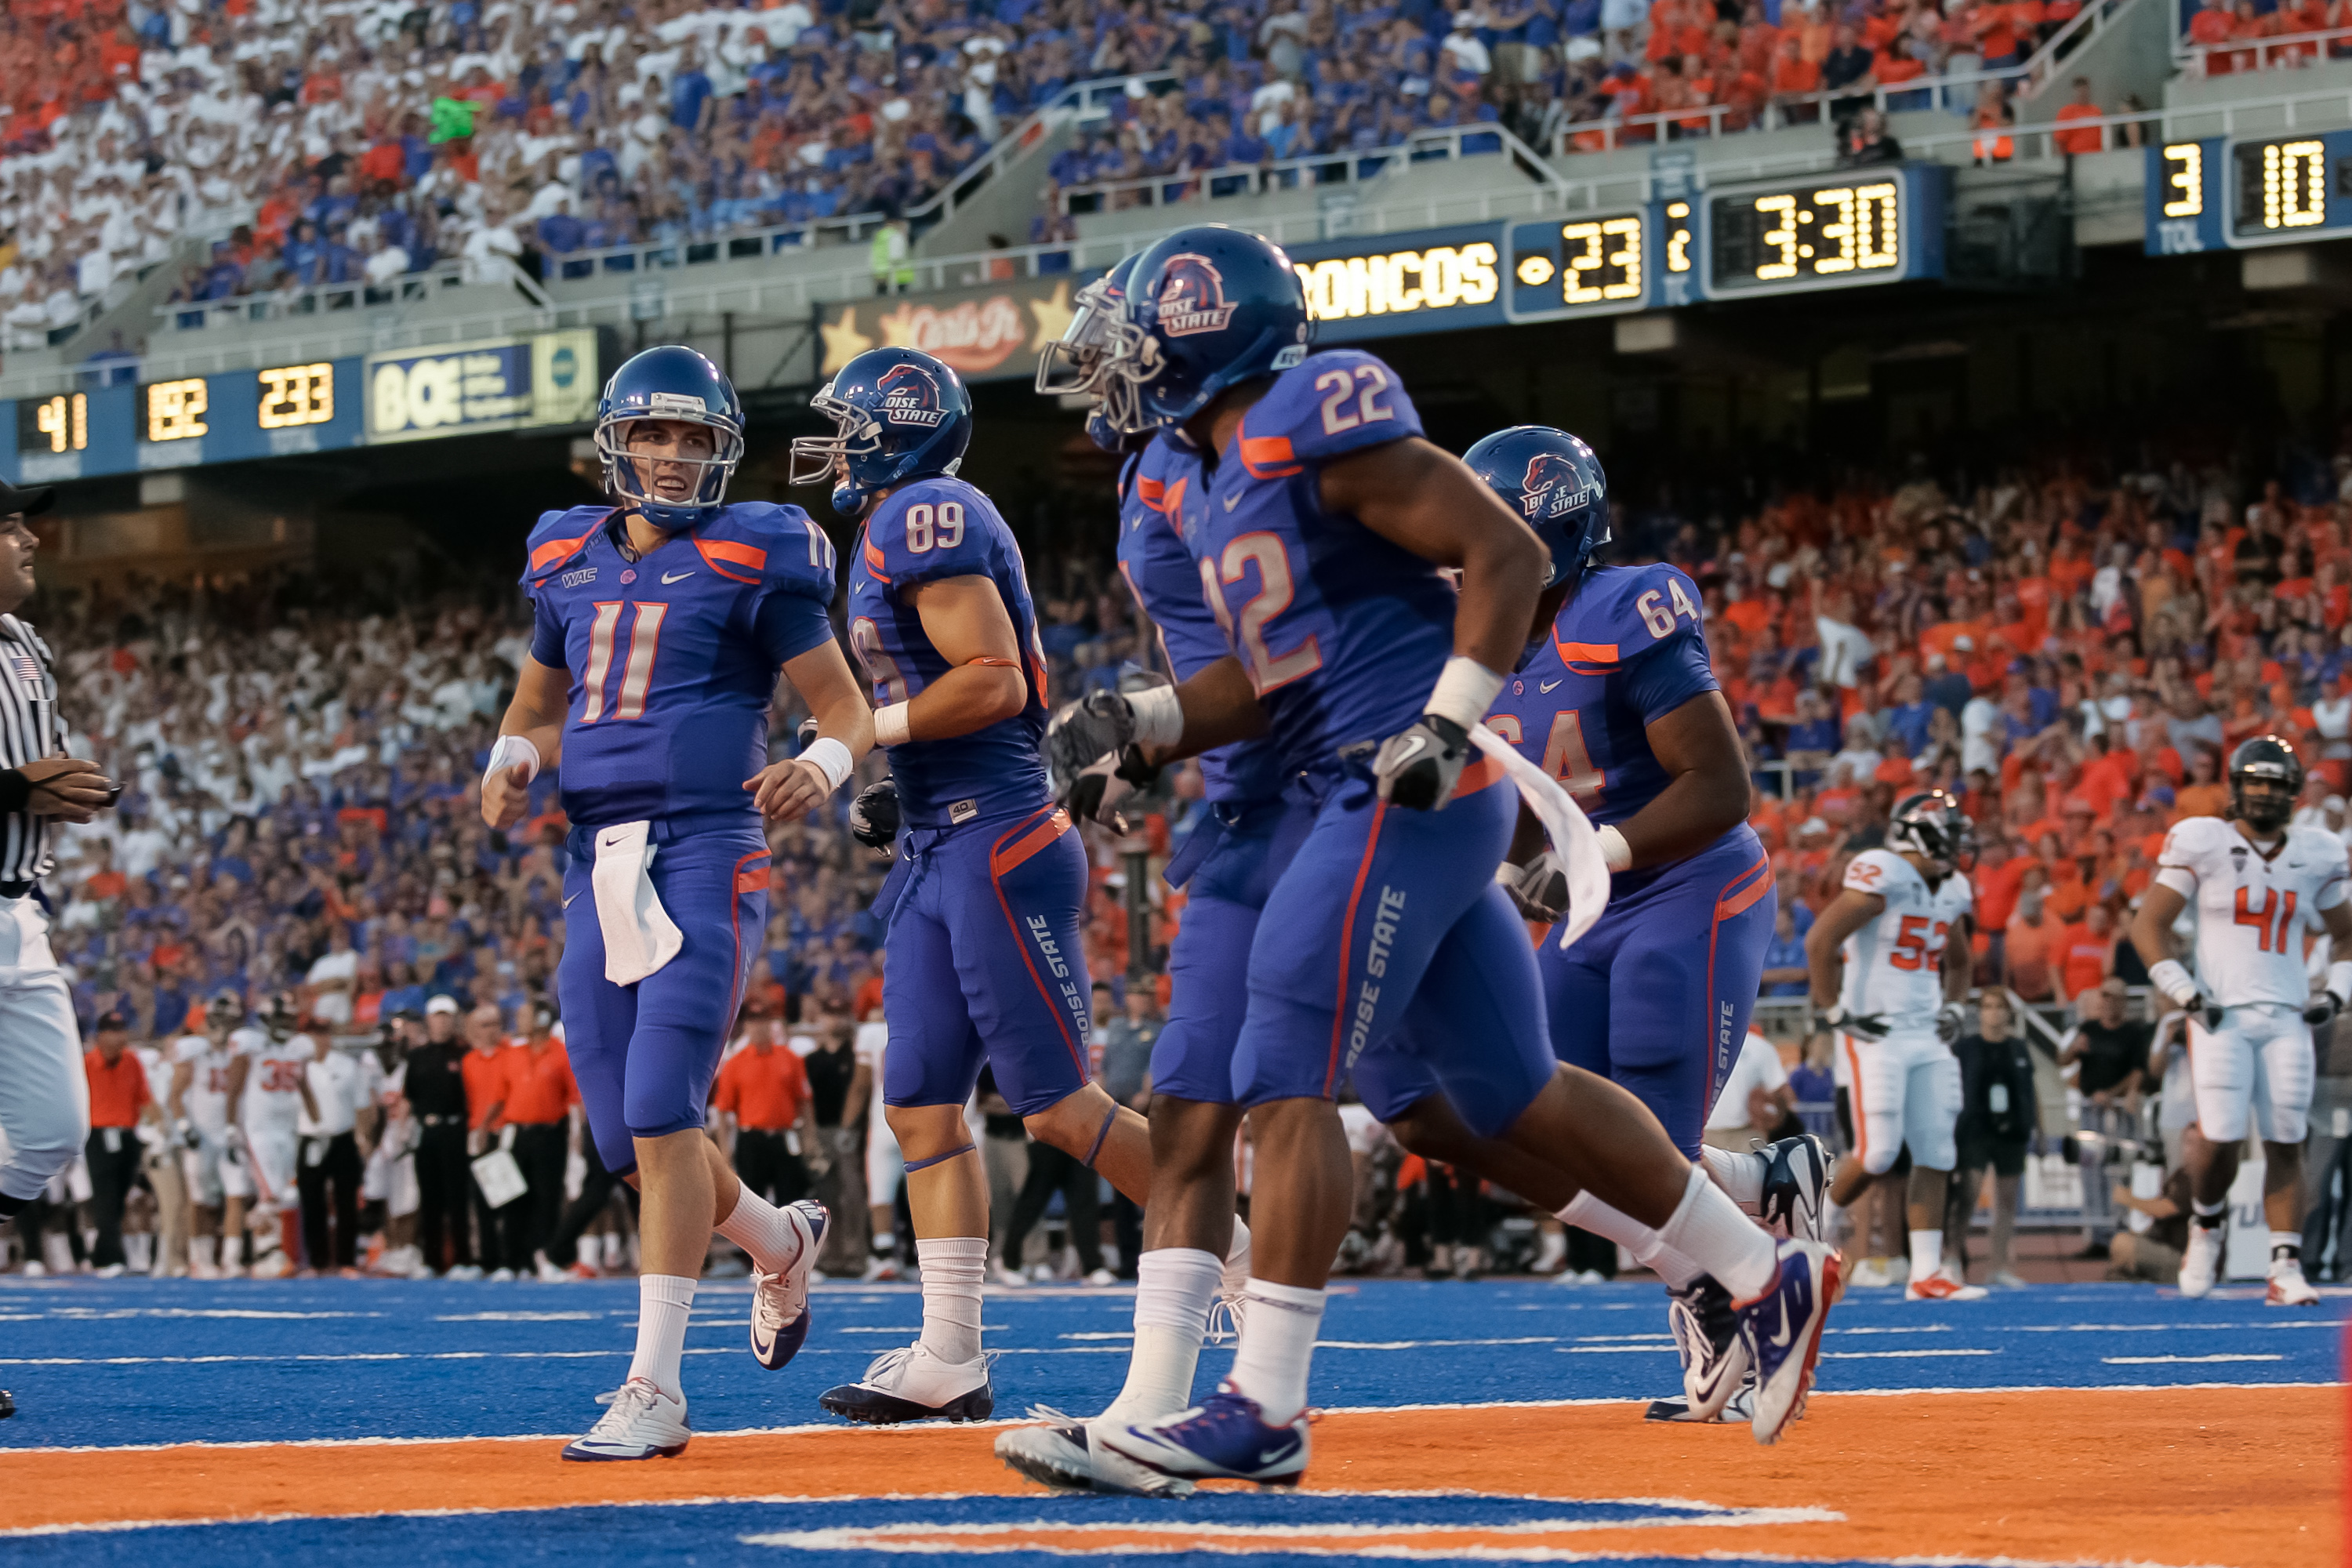 BOISE, ID - SEPTEMBER 25:  Quarterback Kellen Moore #11 and the Boise State Broncos celebrates a touchdown against the Oregon Stage Beavers at Bronco Stadium on September 25, 2010 in Boise, Idaho.  (Photo by Otto Kitsinger III/Getty Images)